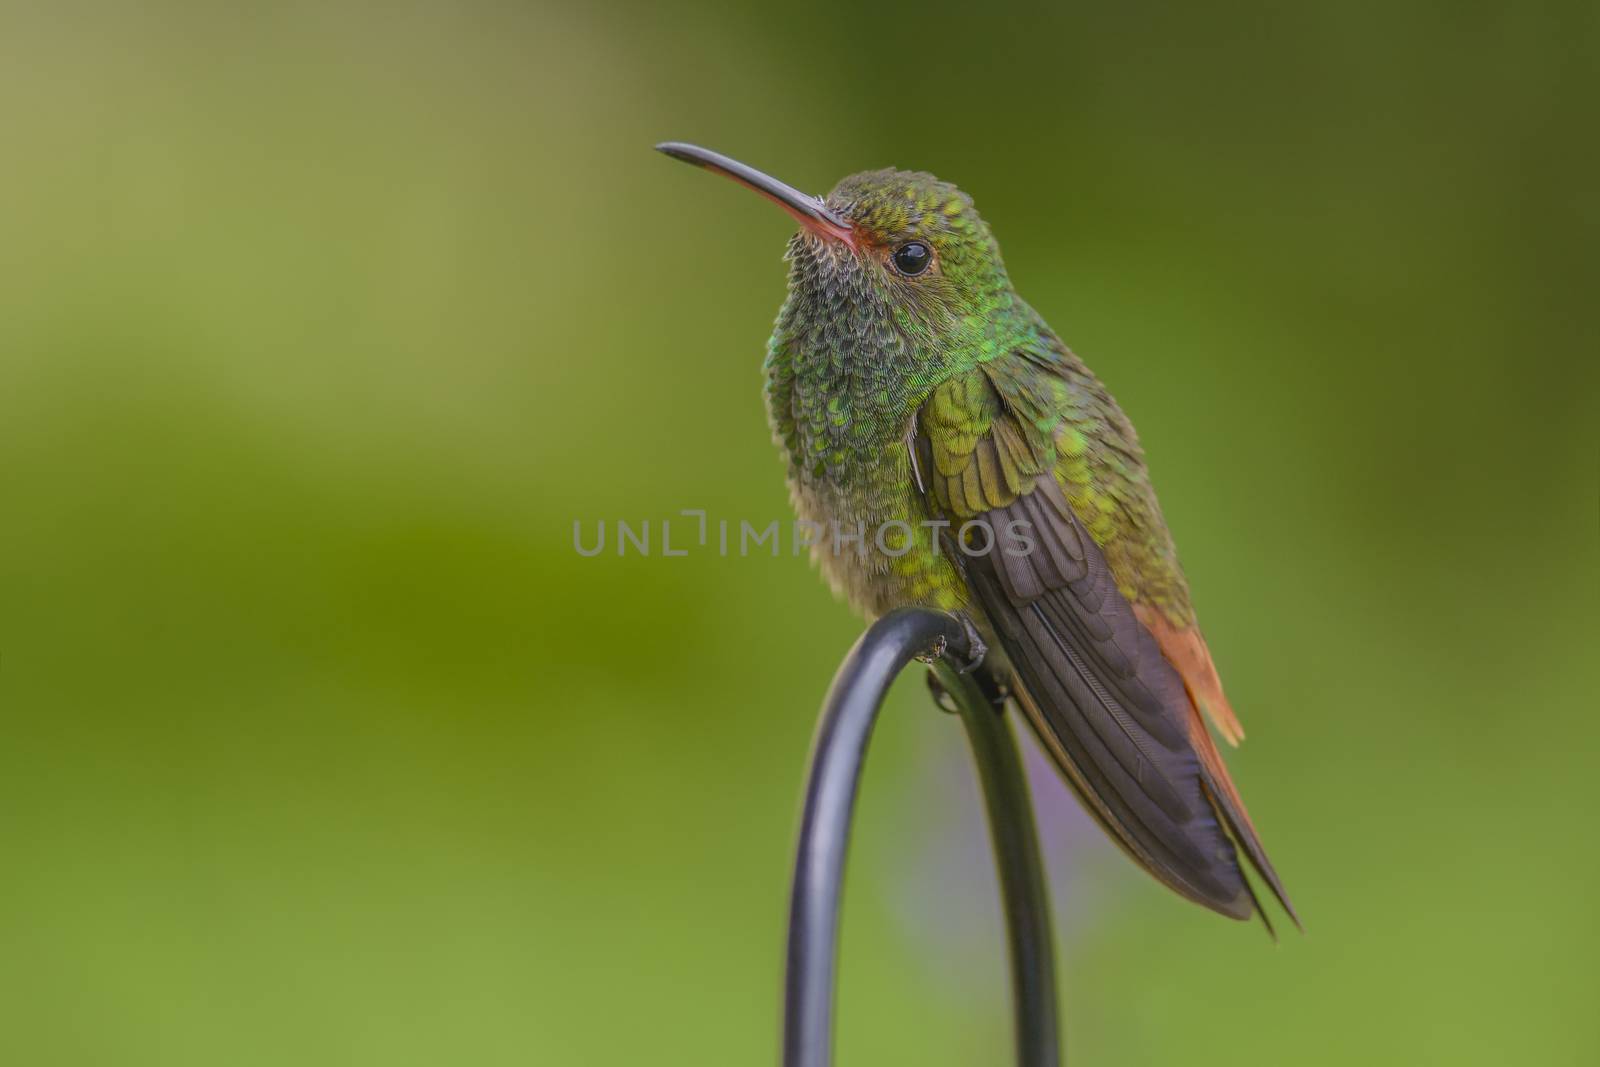 Wary rufous-tailed hummingbird photographed in Costa Rica.